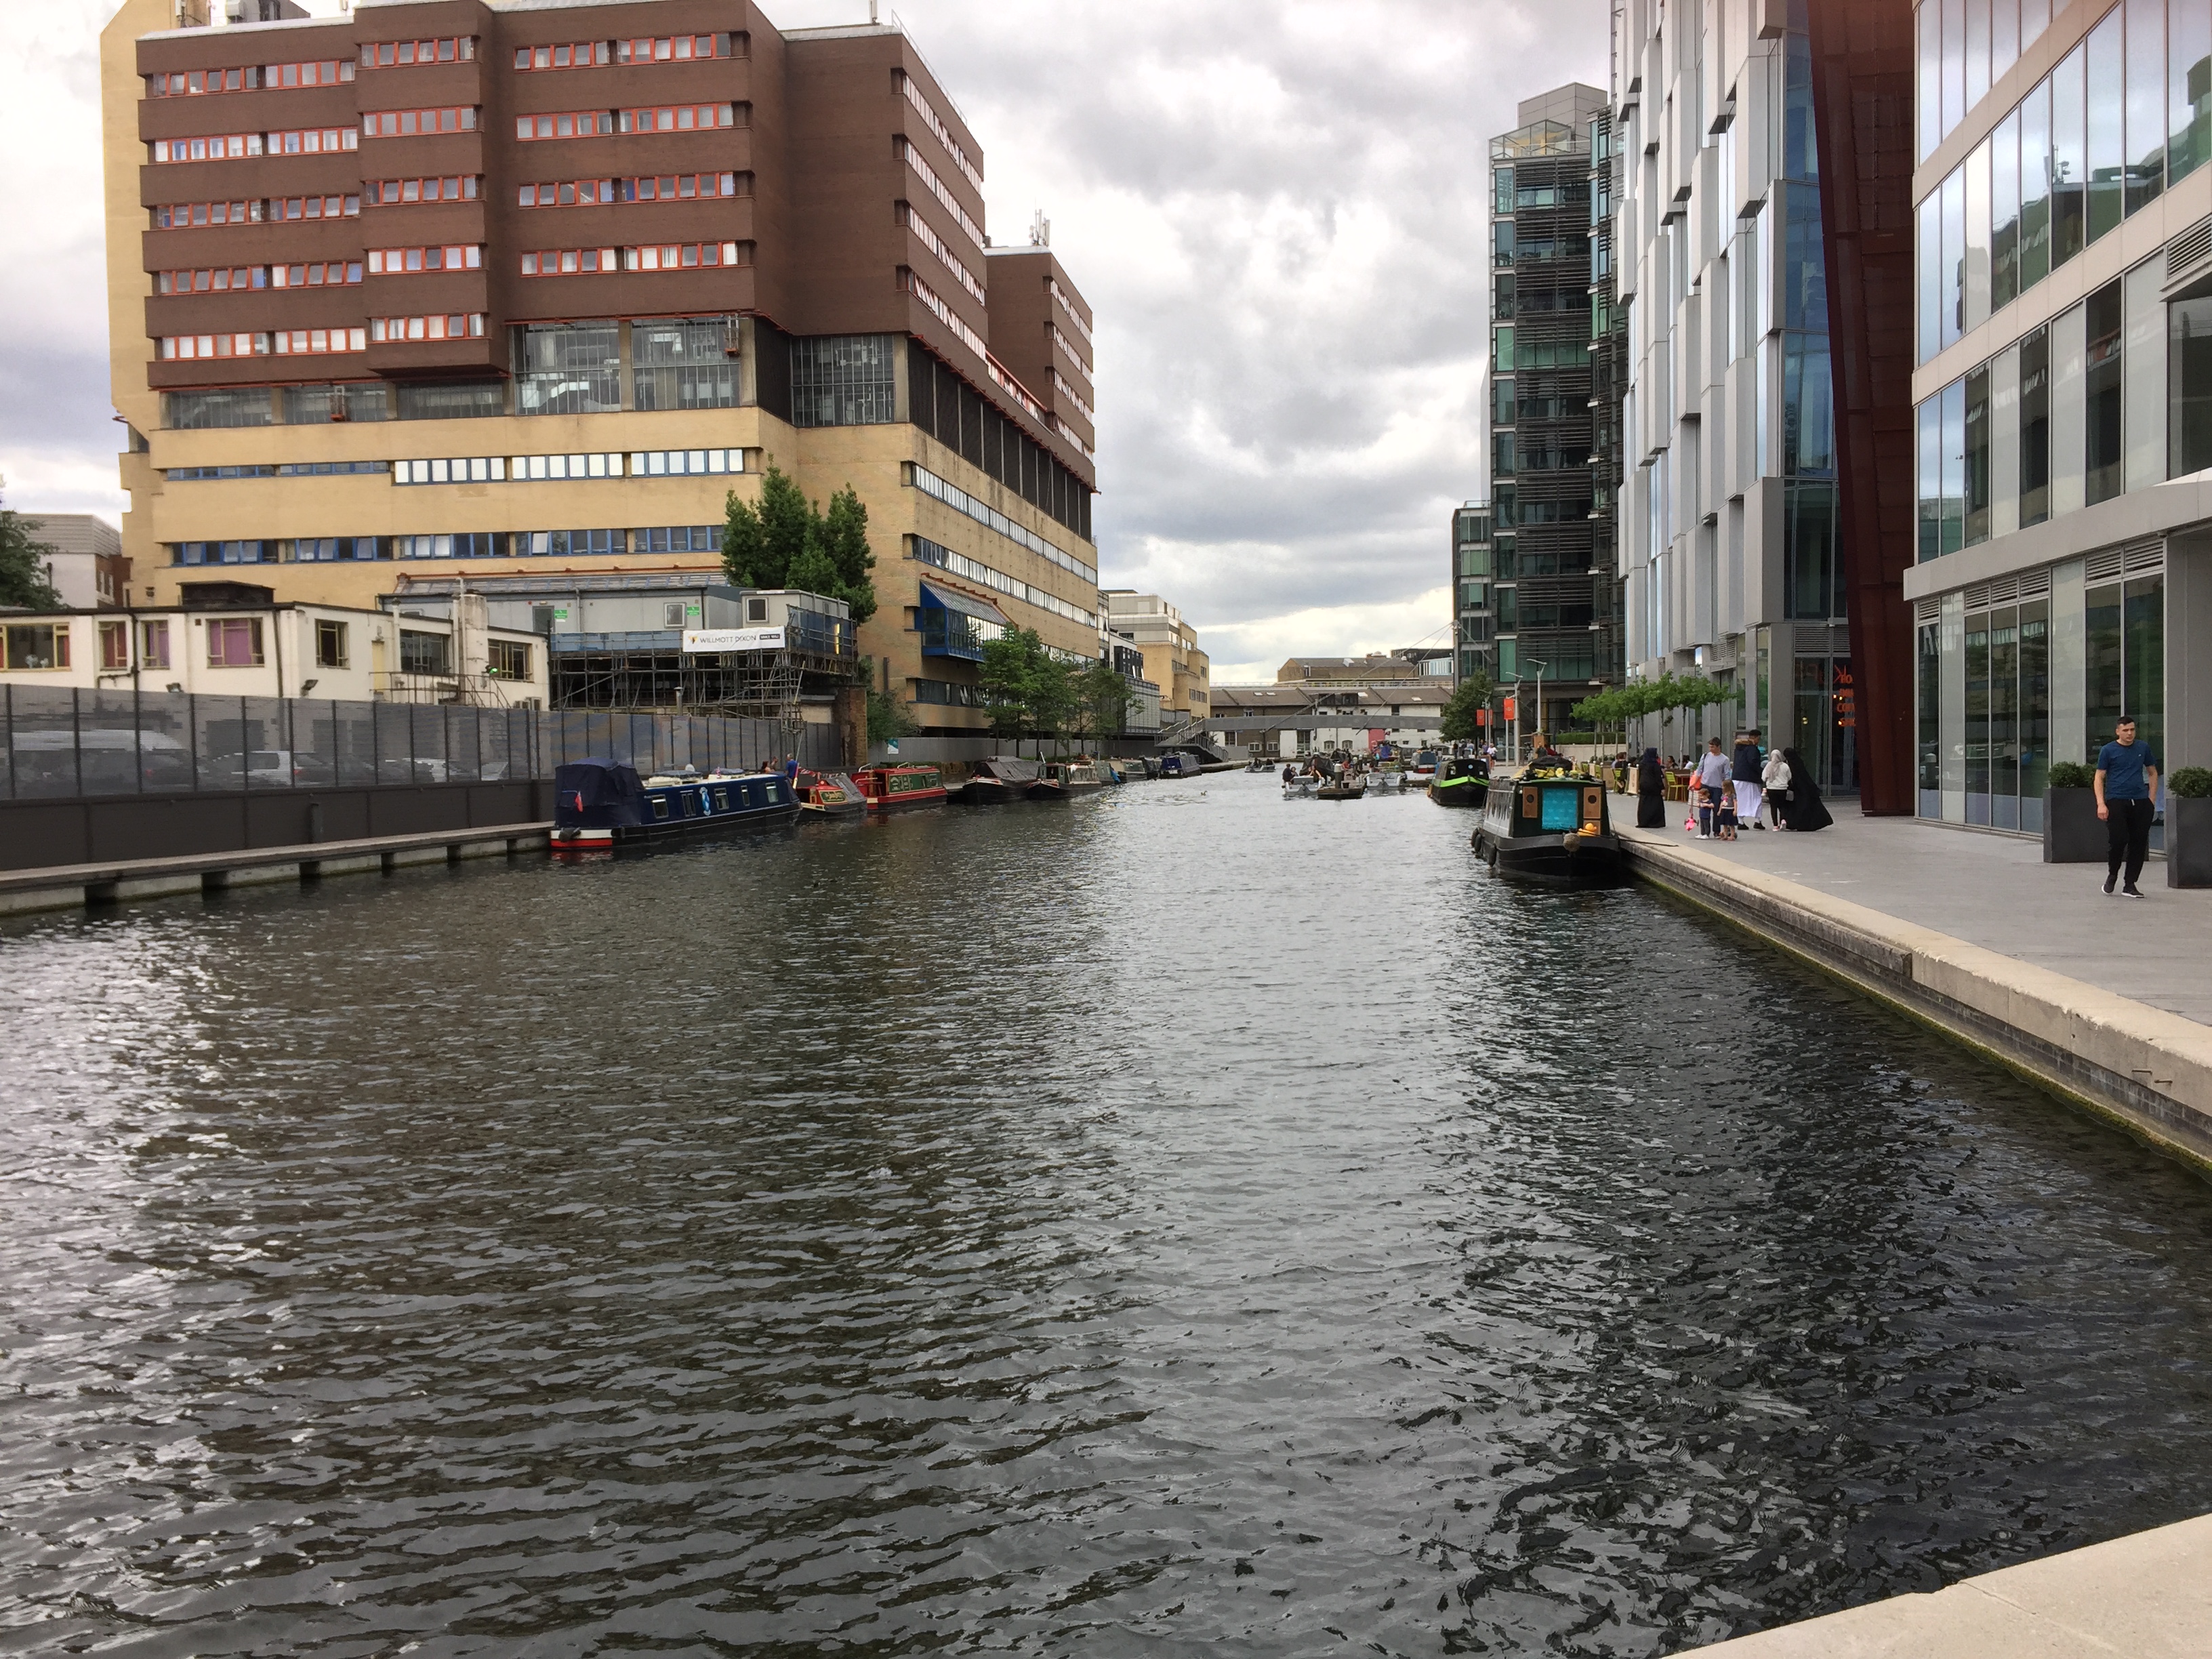 A wide and long canal called the Paddington Basin, with tall buildings on both sides.